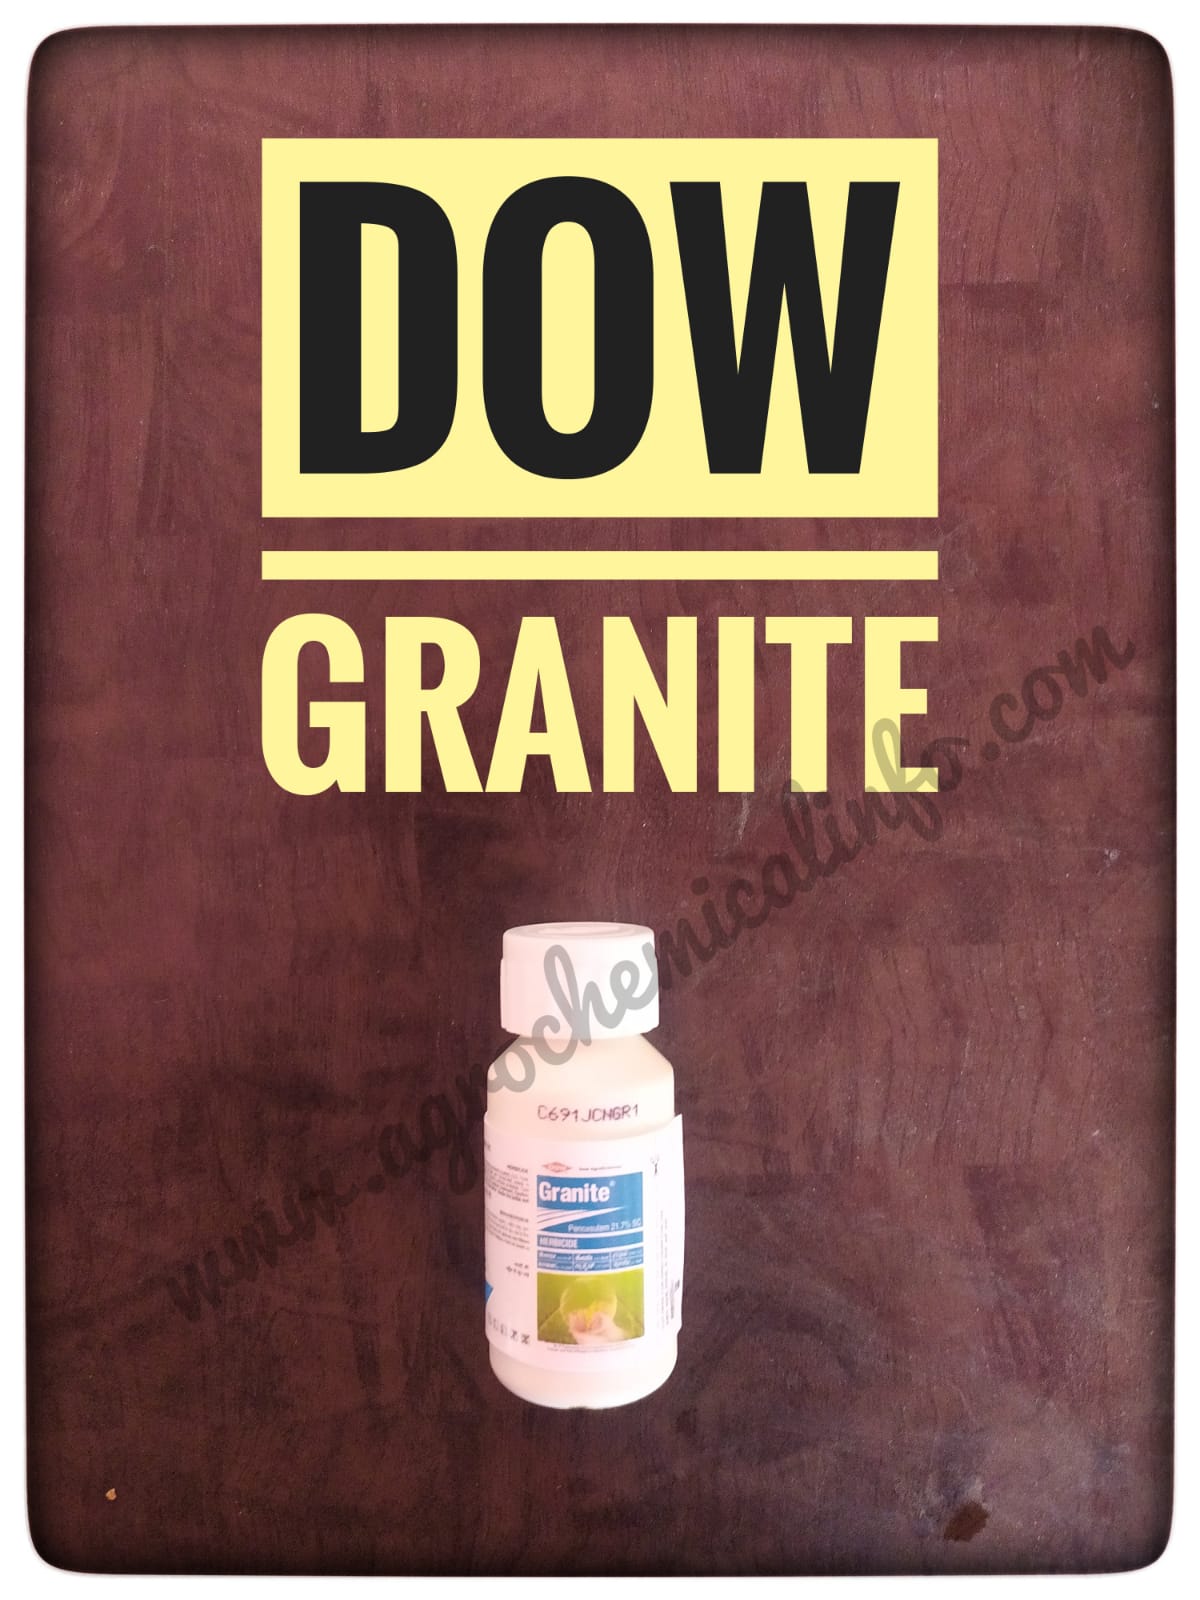 Dow Granite for Weeds